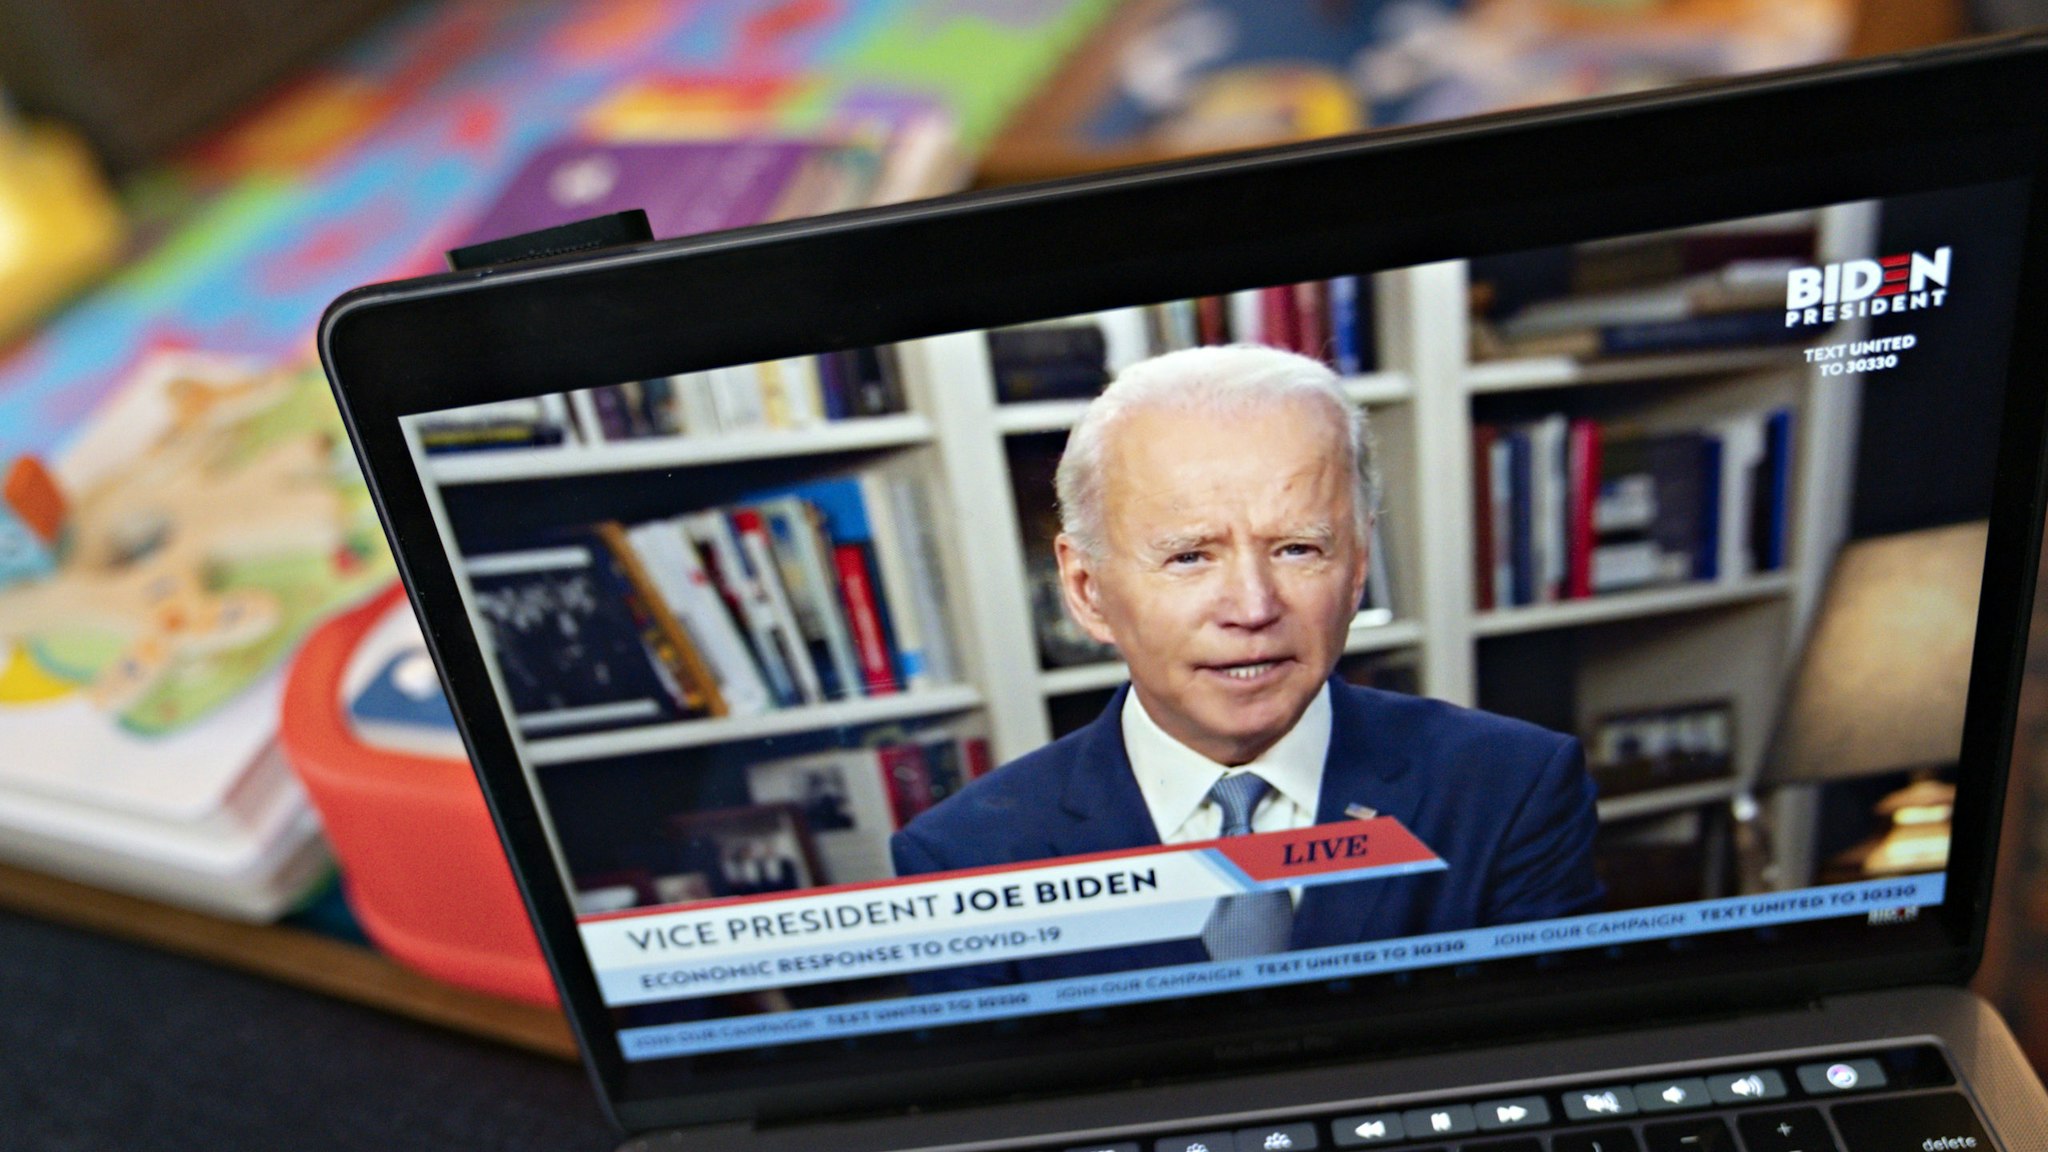 Former Vice President Joe Biden, presumptive Democratic presidential nominee, speaks during a virtual event seen on an Apple Inc. laptop computer in Arlington, Virginia, U.S., on Monday, April 13, 2020. Senator Bernie Sanders endorsed Biden during the joint livestream saying that Americans of all political affiliations should back the former vice president. Photographer: Andrew Harrer/Bloomberg via Getty Images